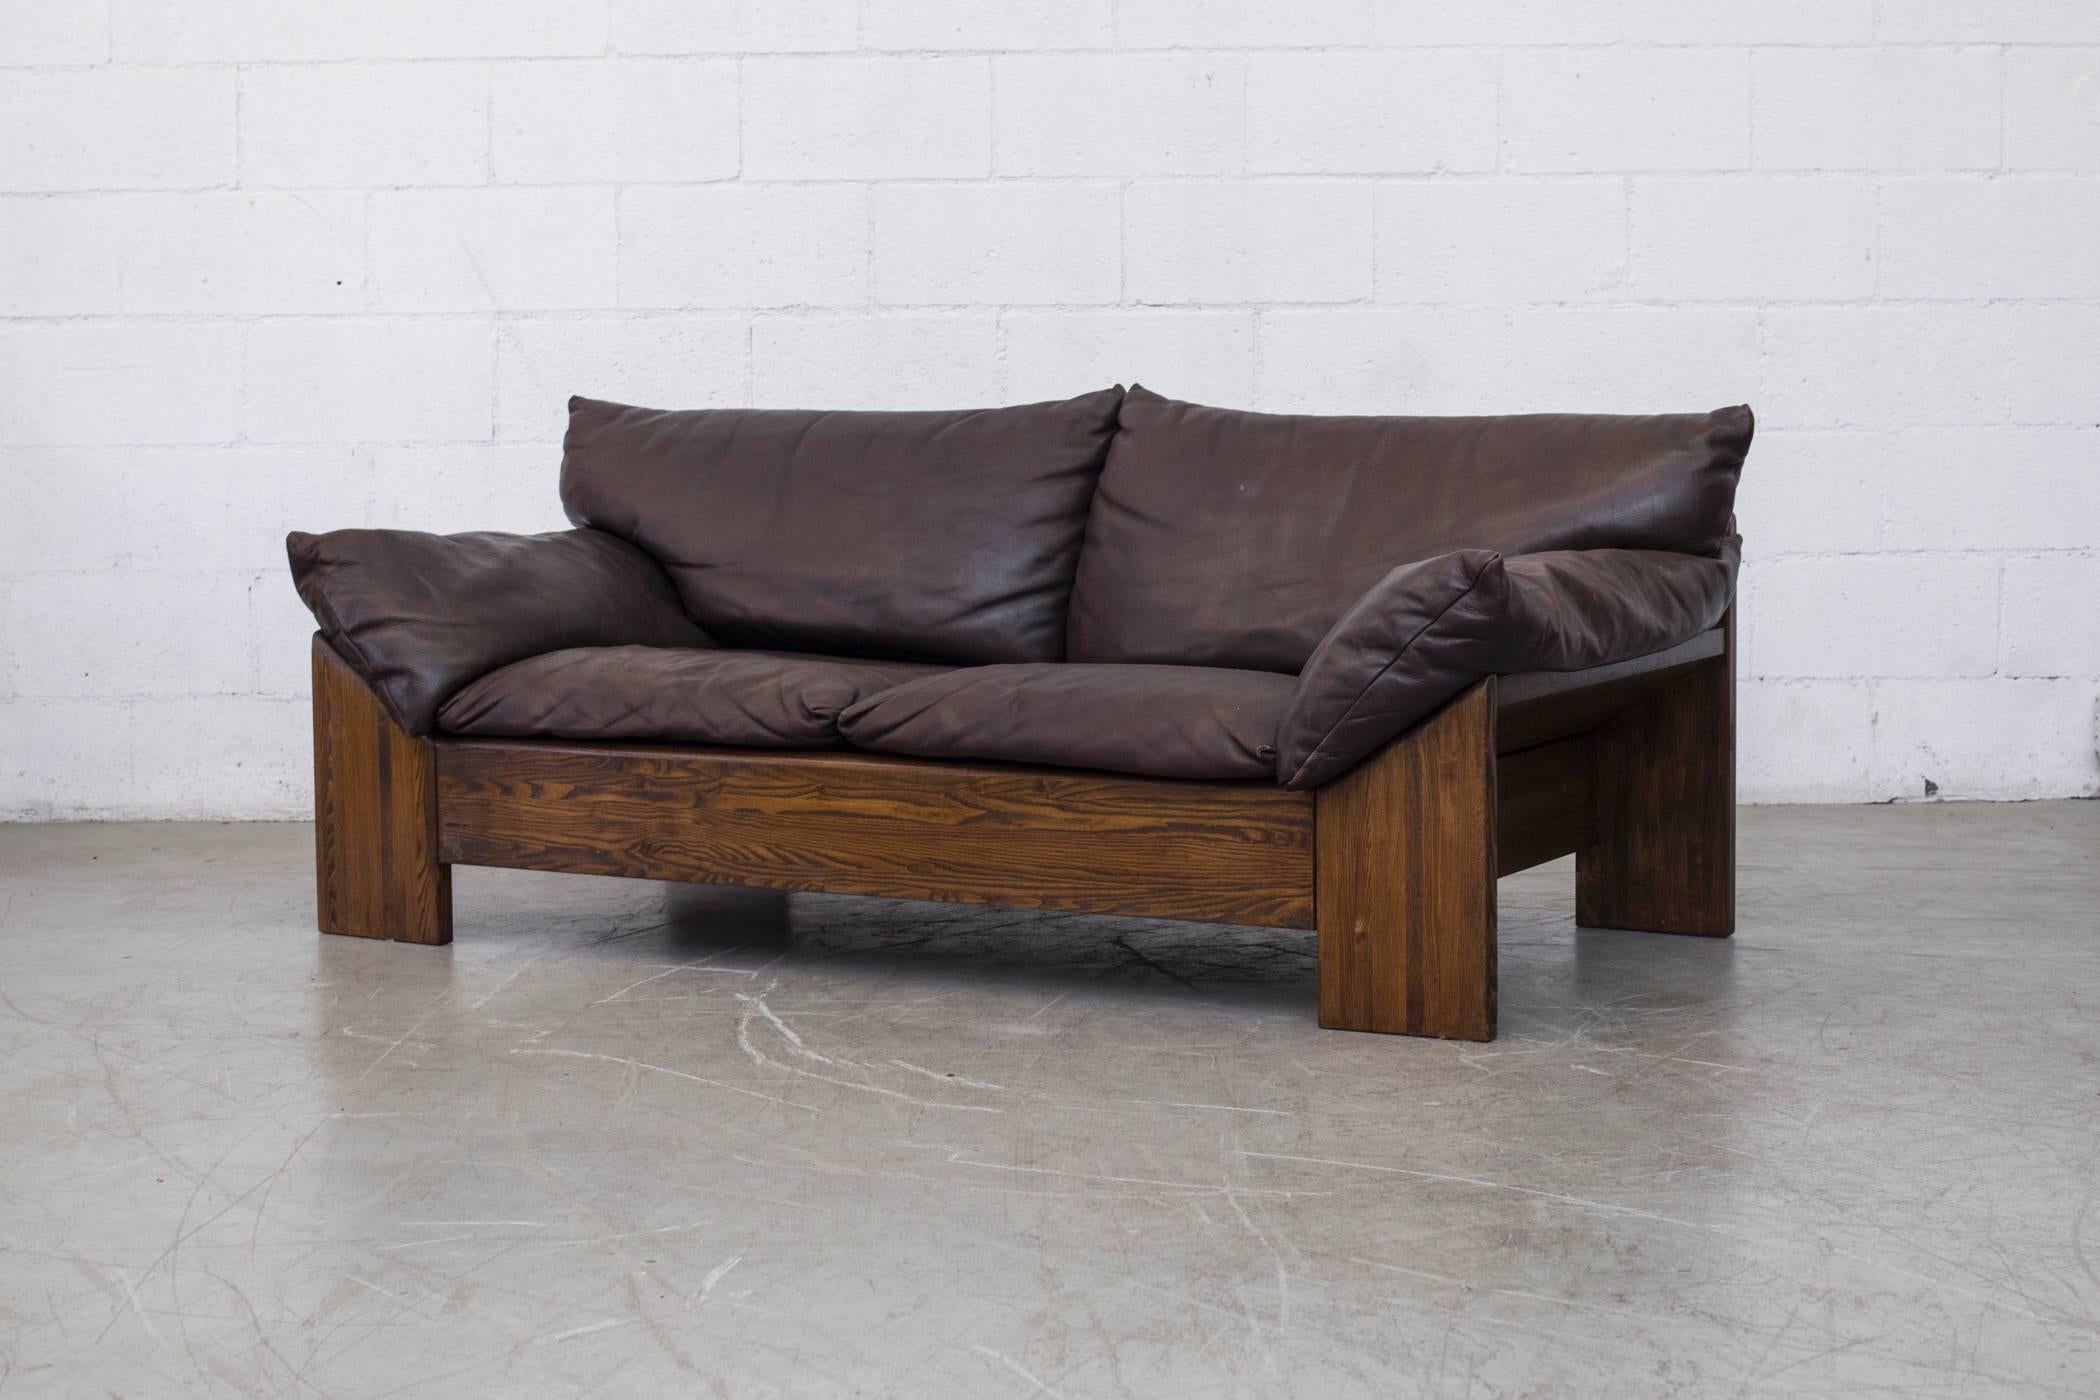 Impressive dark oak loveseat with thick and heavy buffalo leather cushions. Back panel also with leather inset, good original condition with visible patina and wear consistent with it's age and usage. Matching three-seat sofa also available, listed